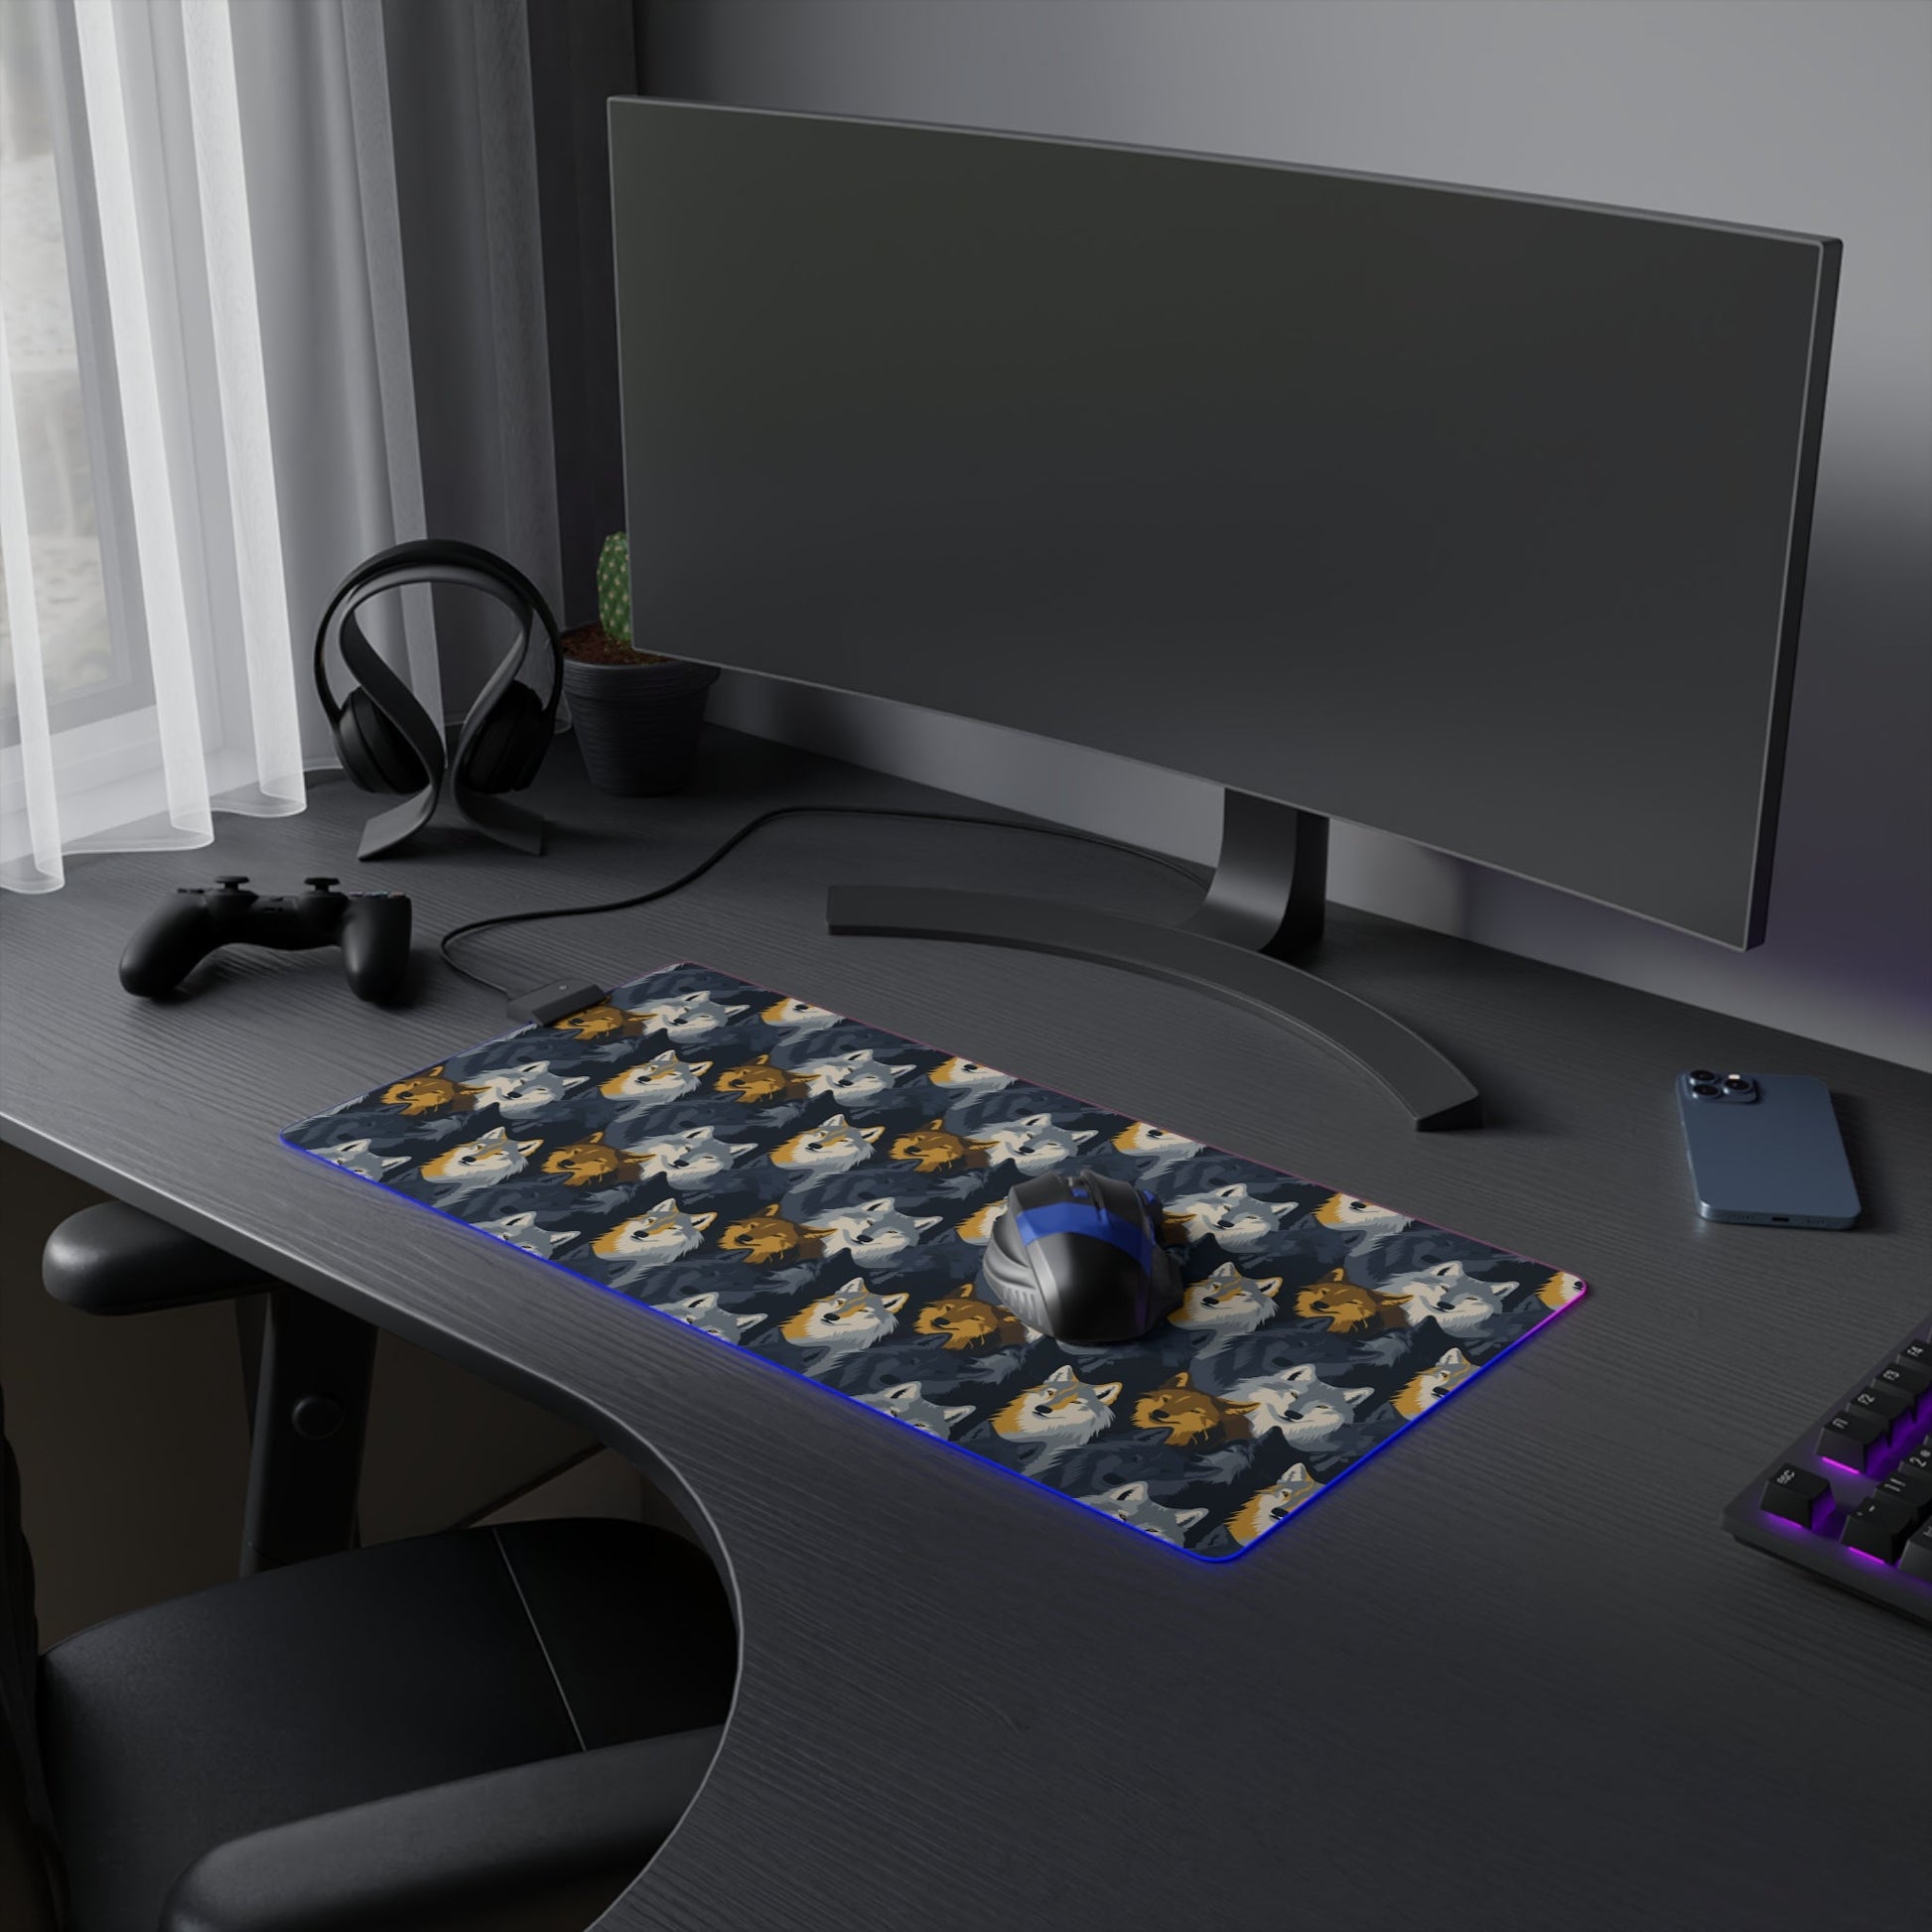 15 Yellow Wolves LED Gaming Mouse Pad with 14 Different